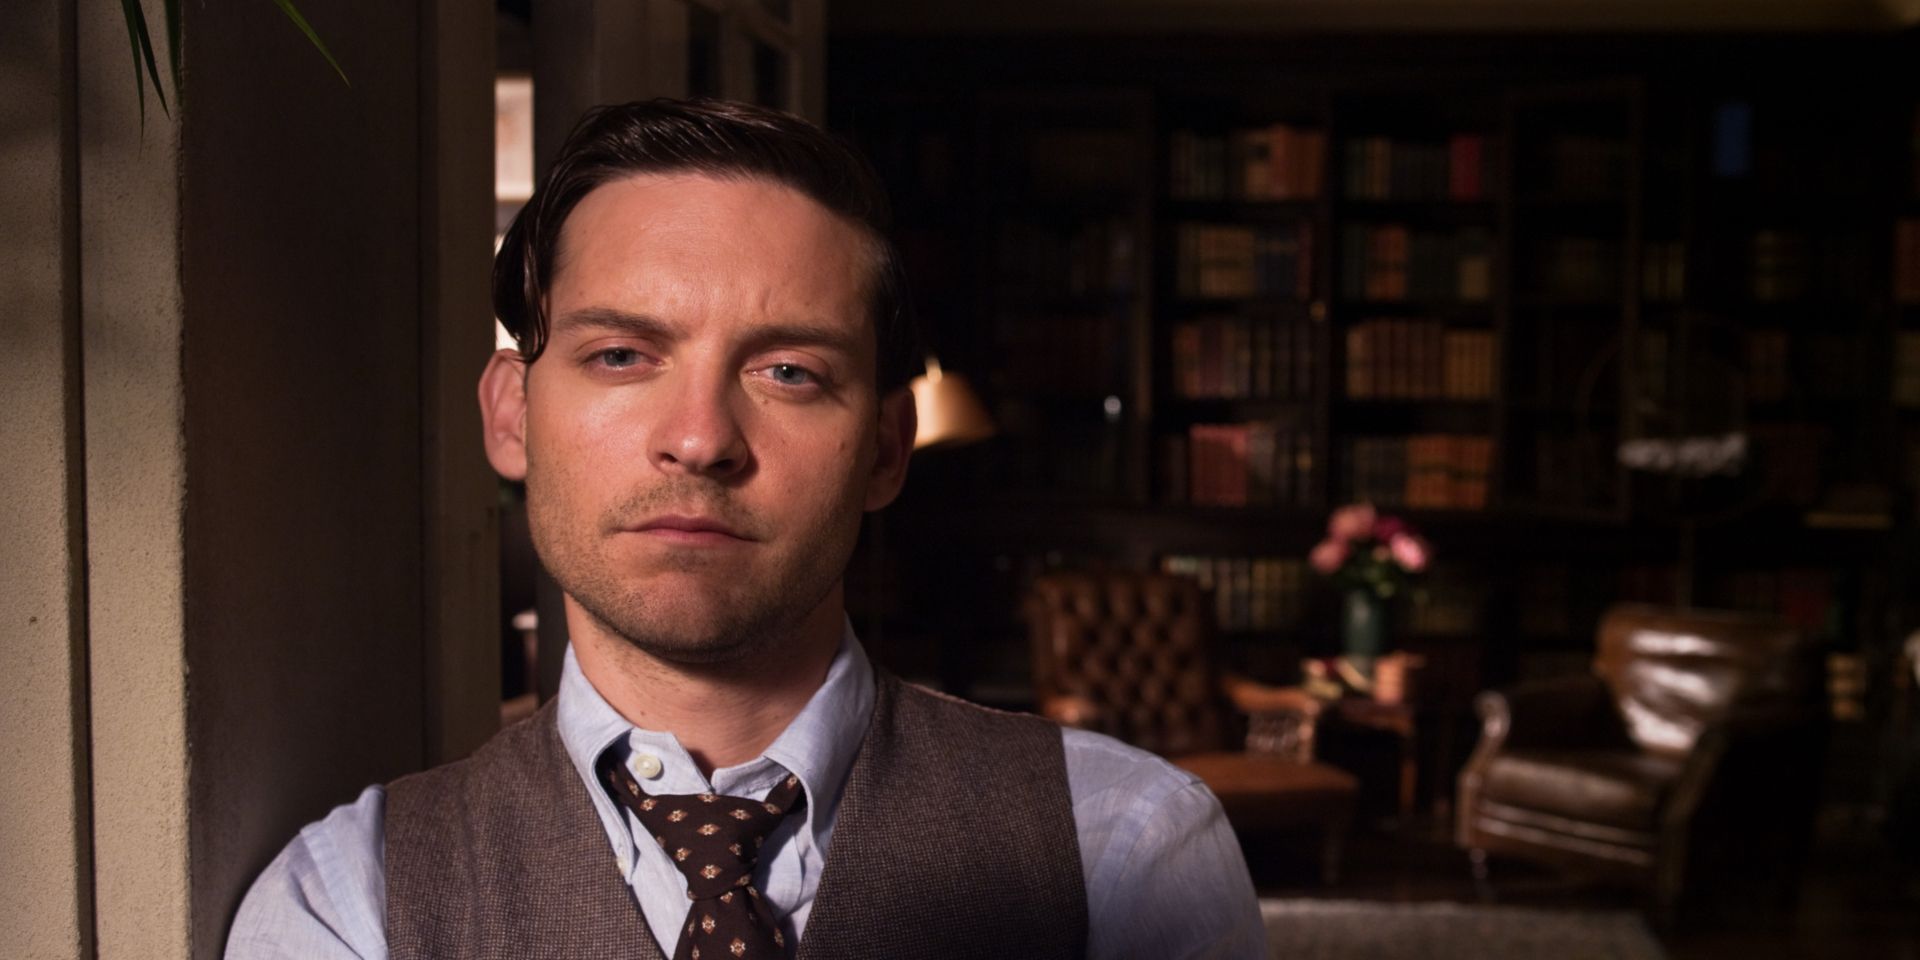 A close-up of Toby MacGuire as Nick Carraway in The Great Gatsby.